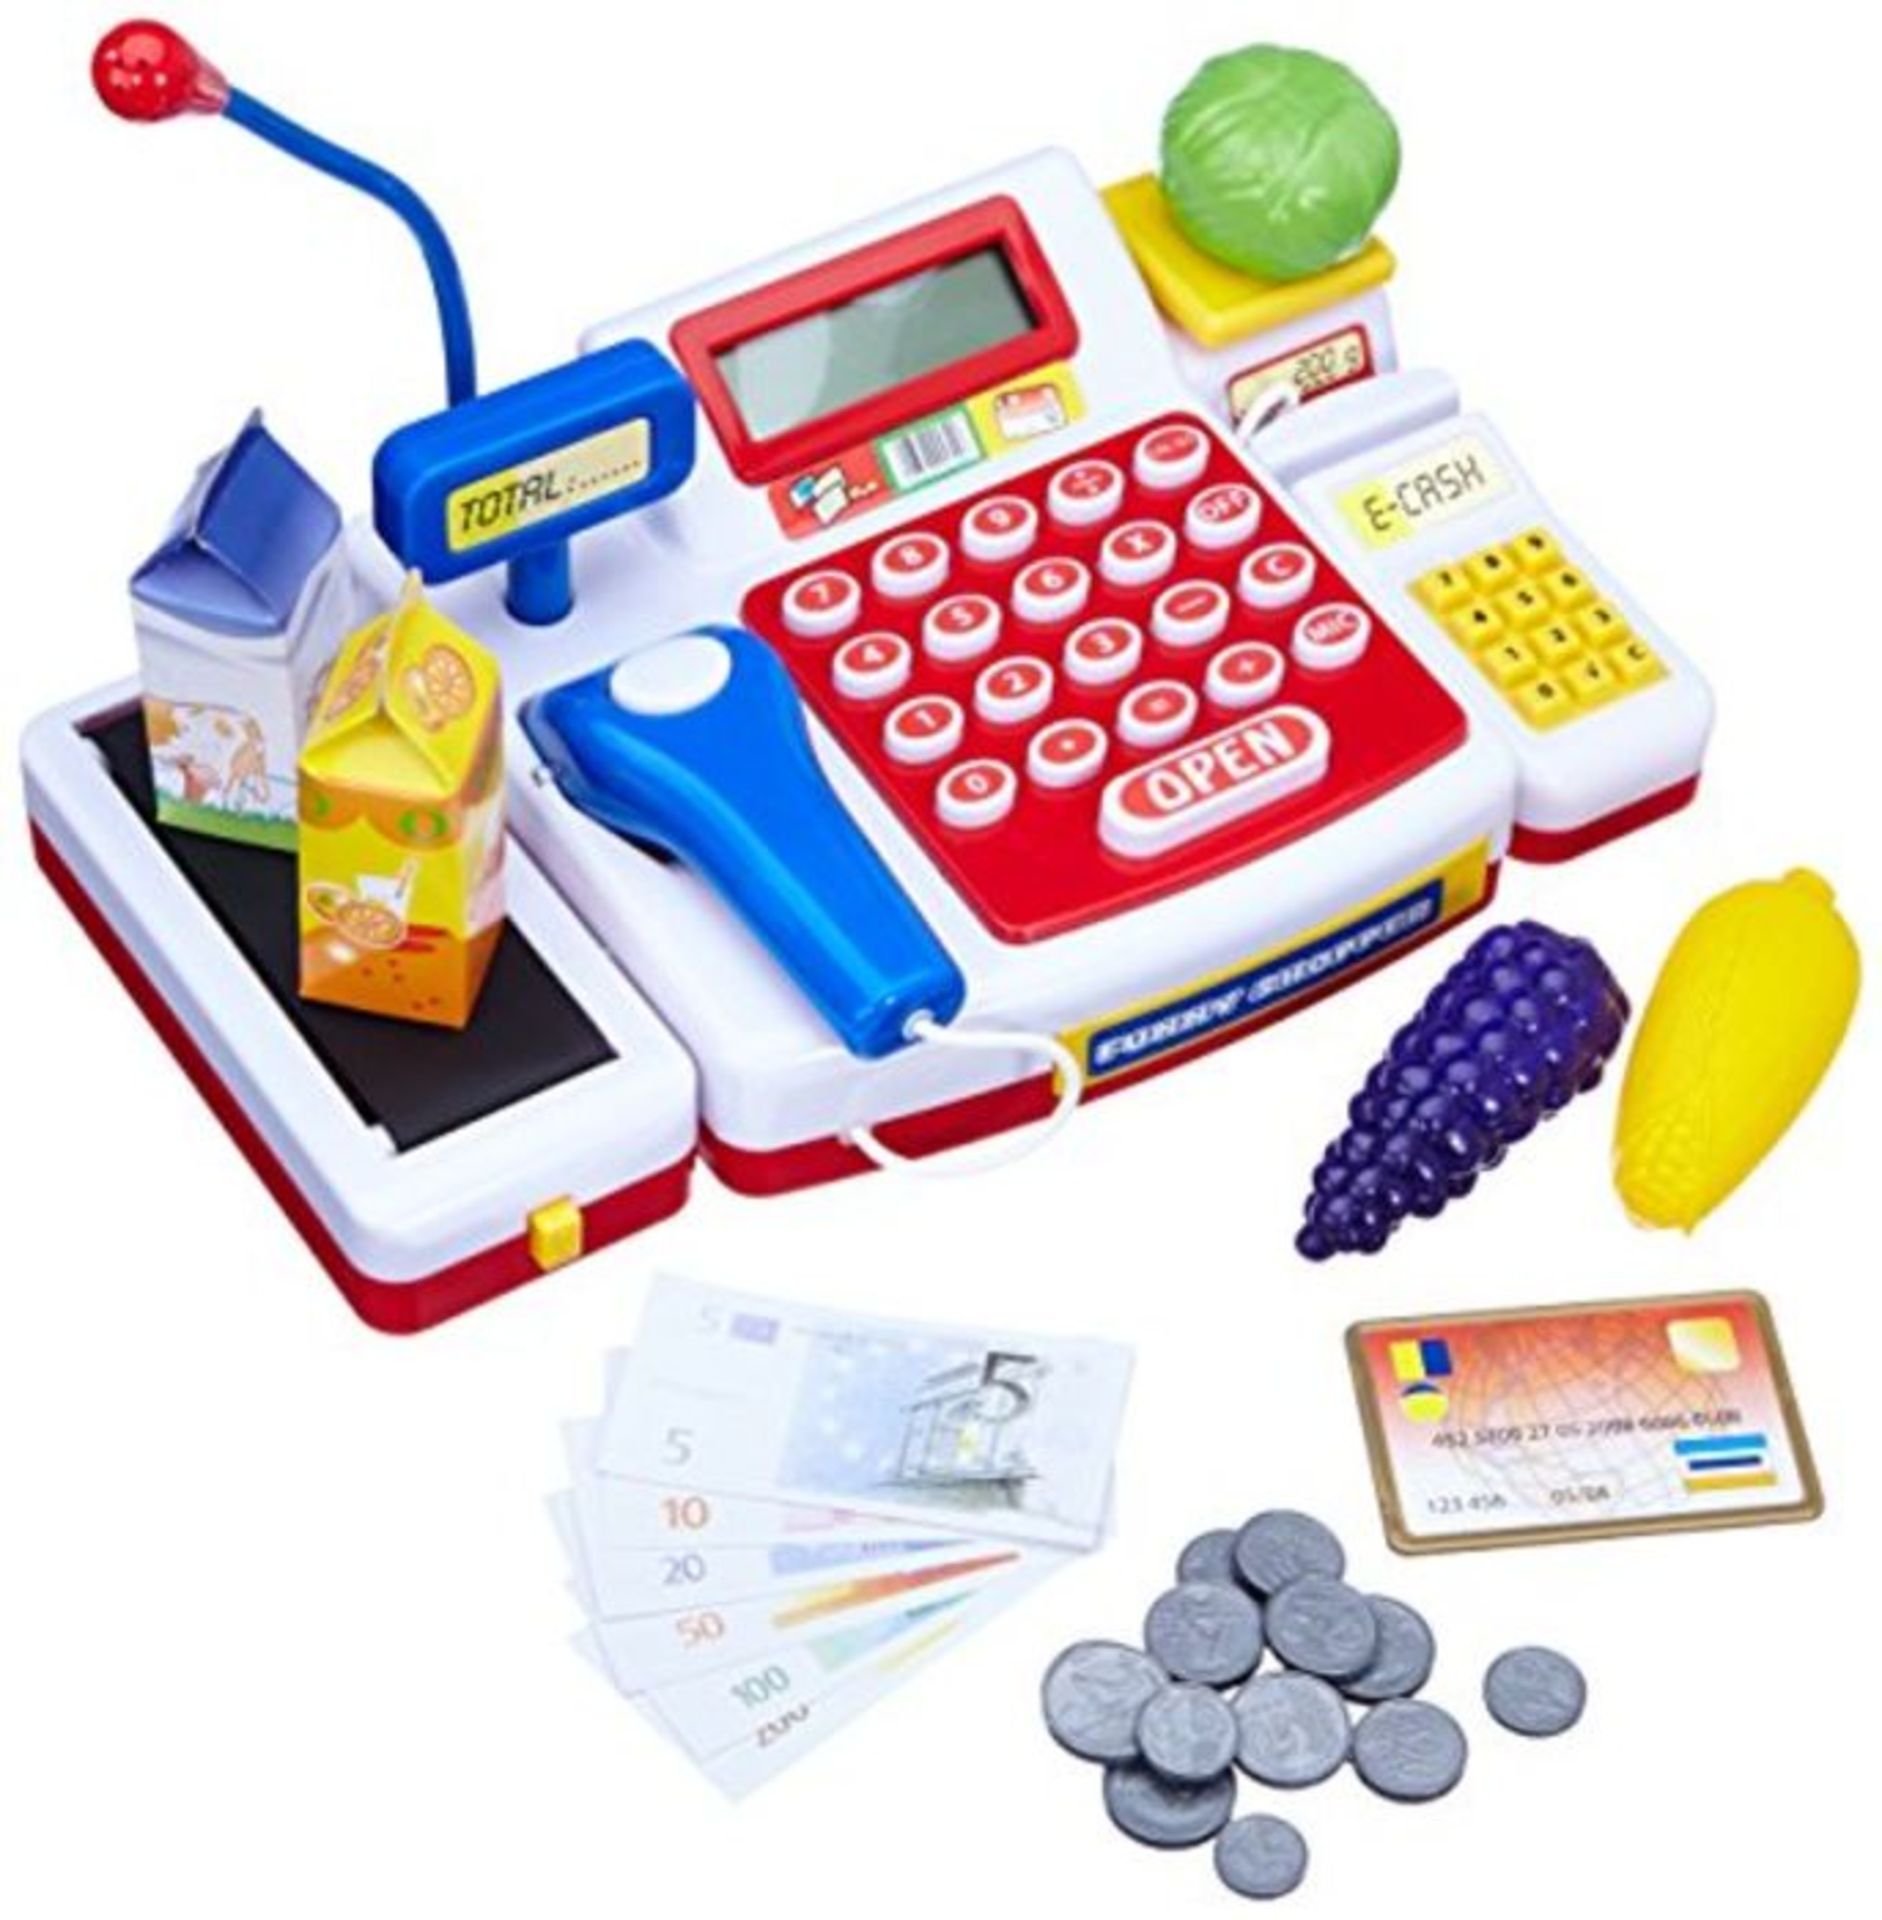 COMBINED RRP £2554.00 LOT TO CONTAIN 295 ASSORTED Home Improvement: Hama, Car, Simba, iPad, Ank - Image 3 of 94